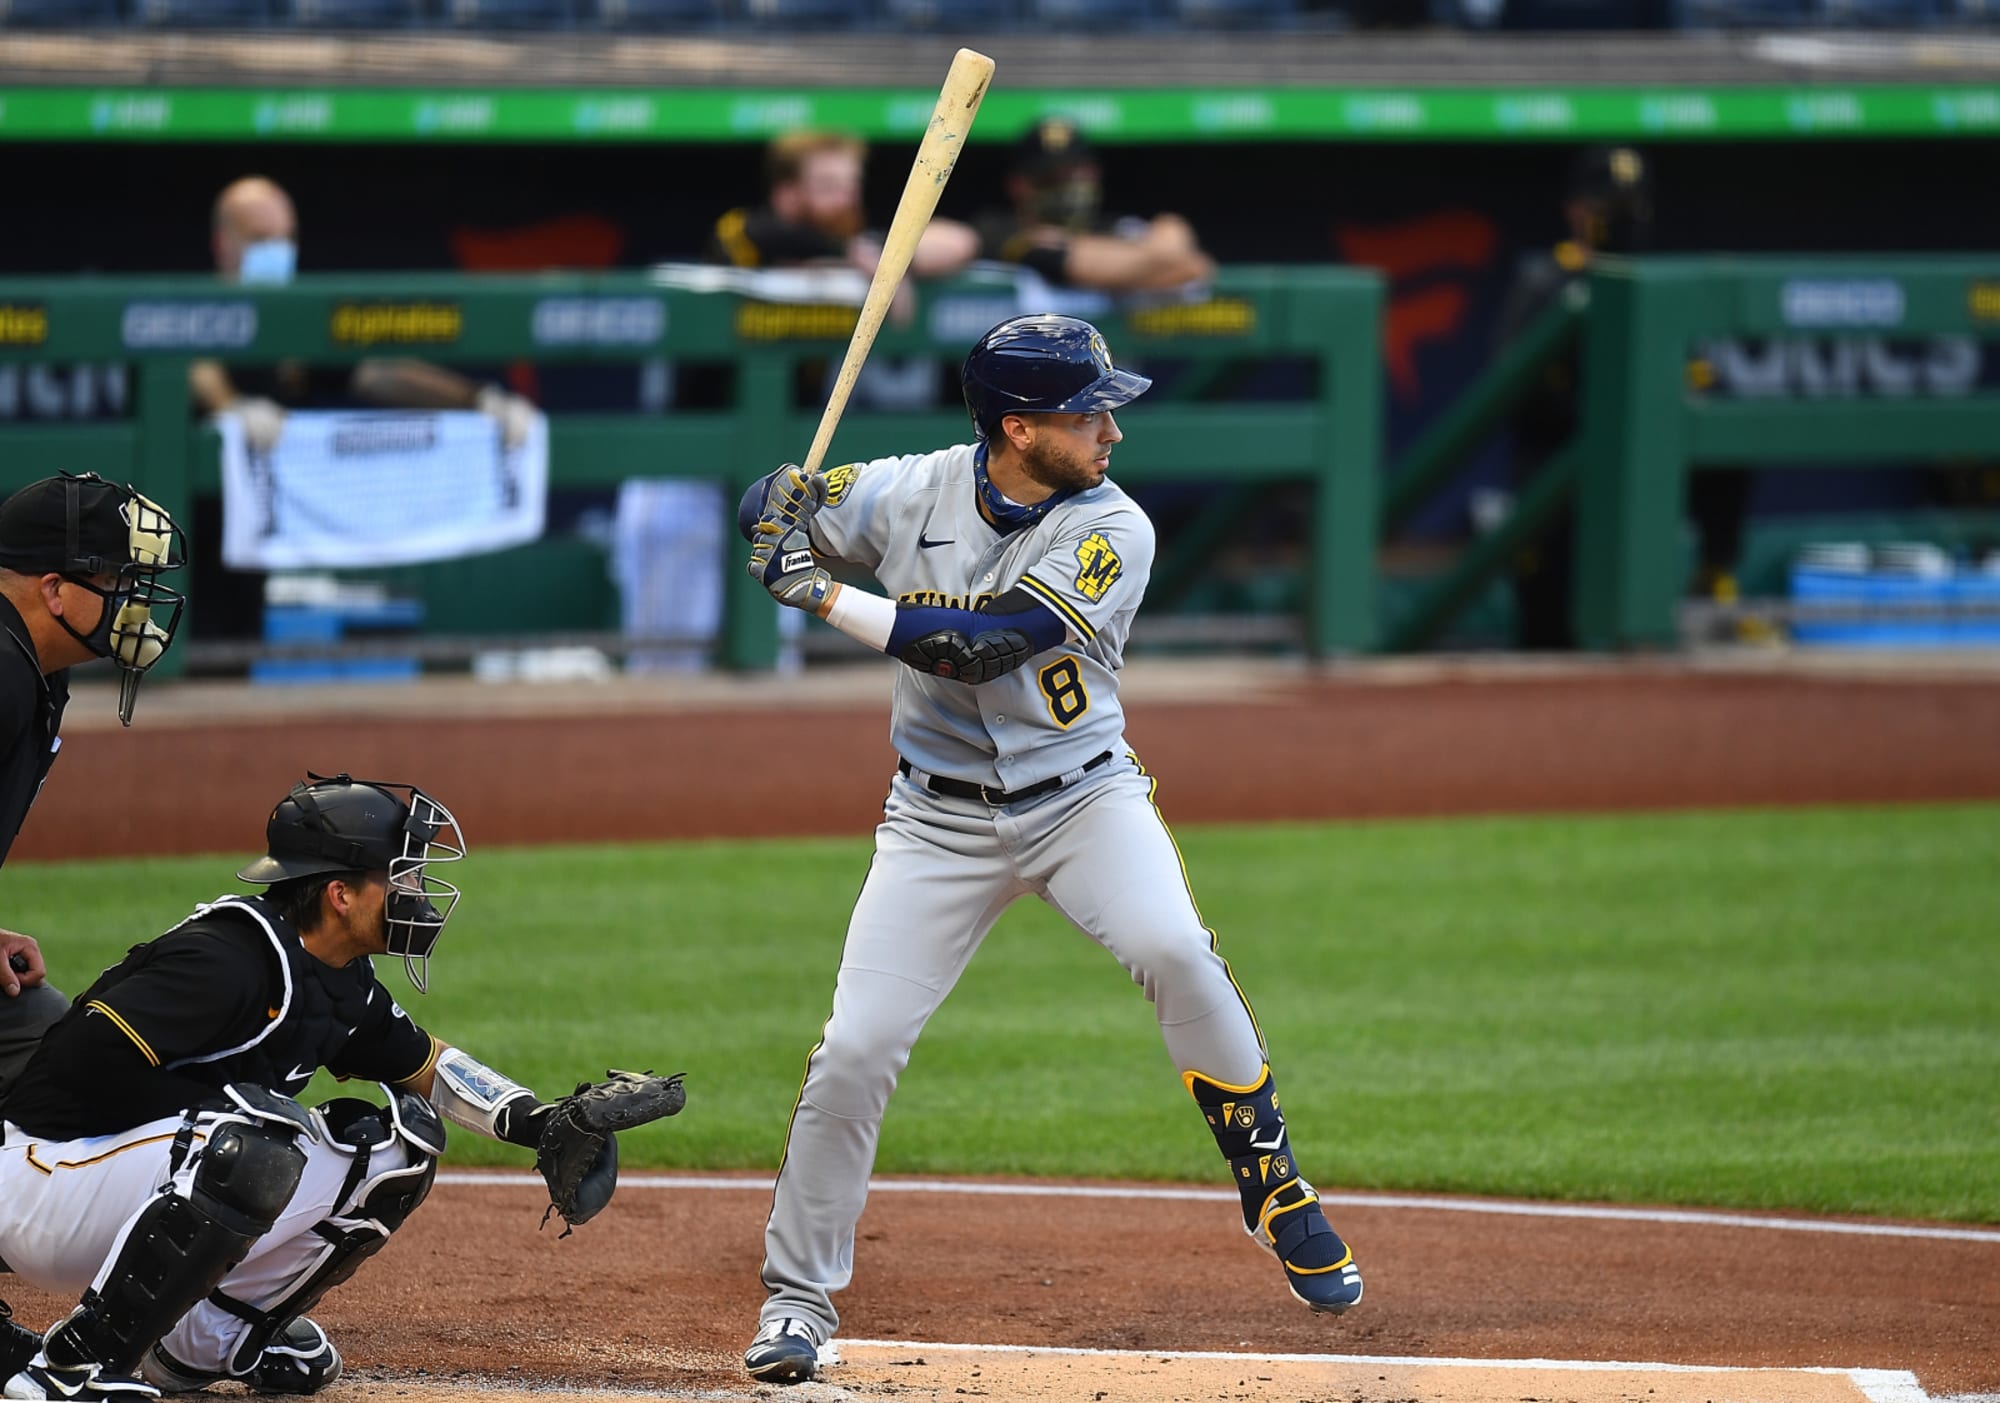 Bally Sports Wisconsin - Ryan Braun has officially announced his retirement.  #RyanBraunForever